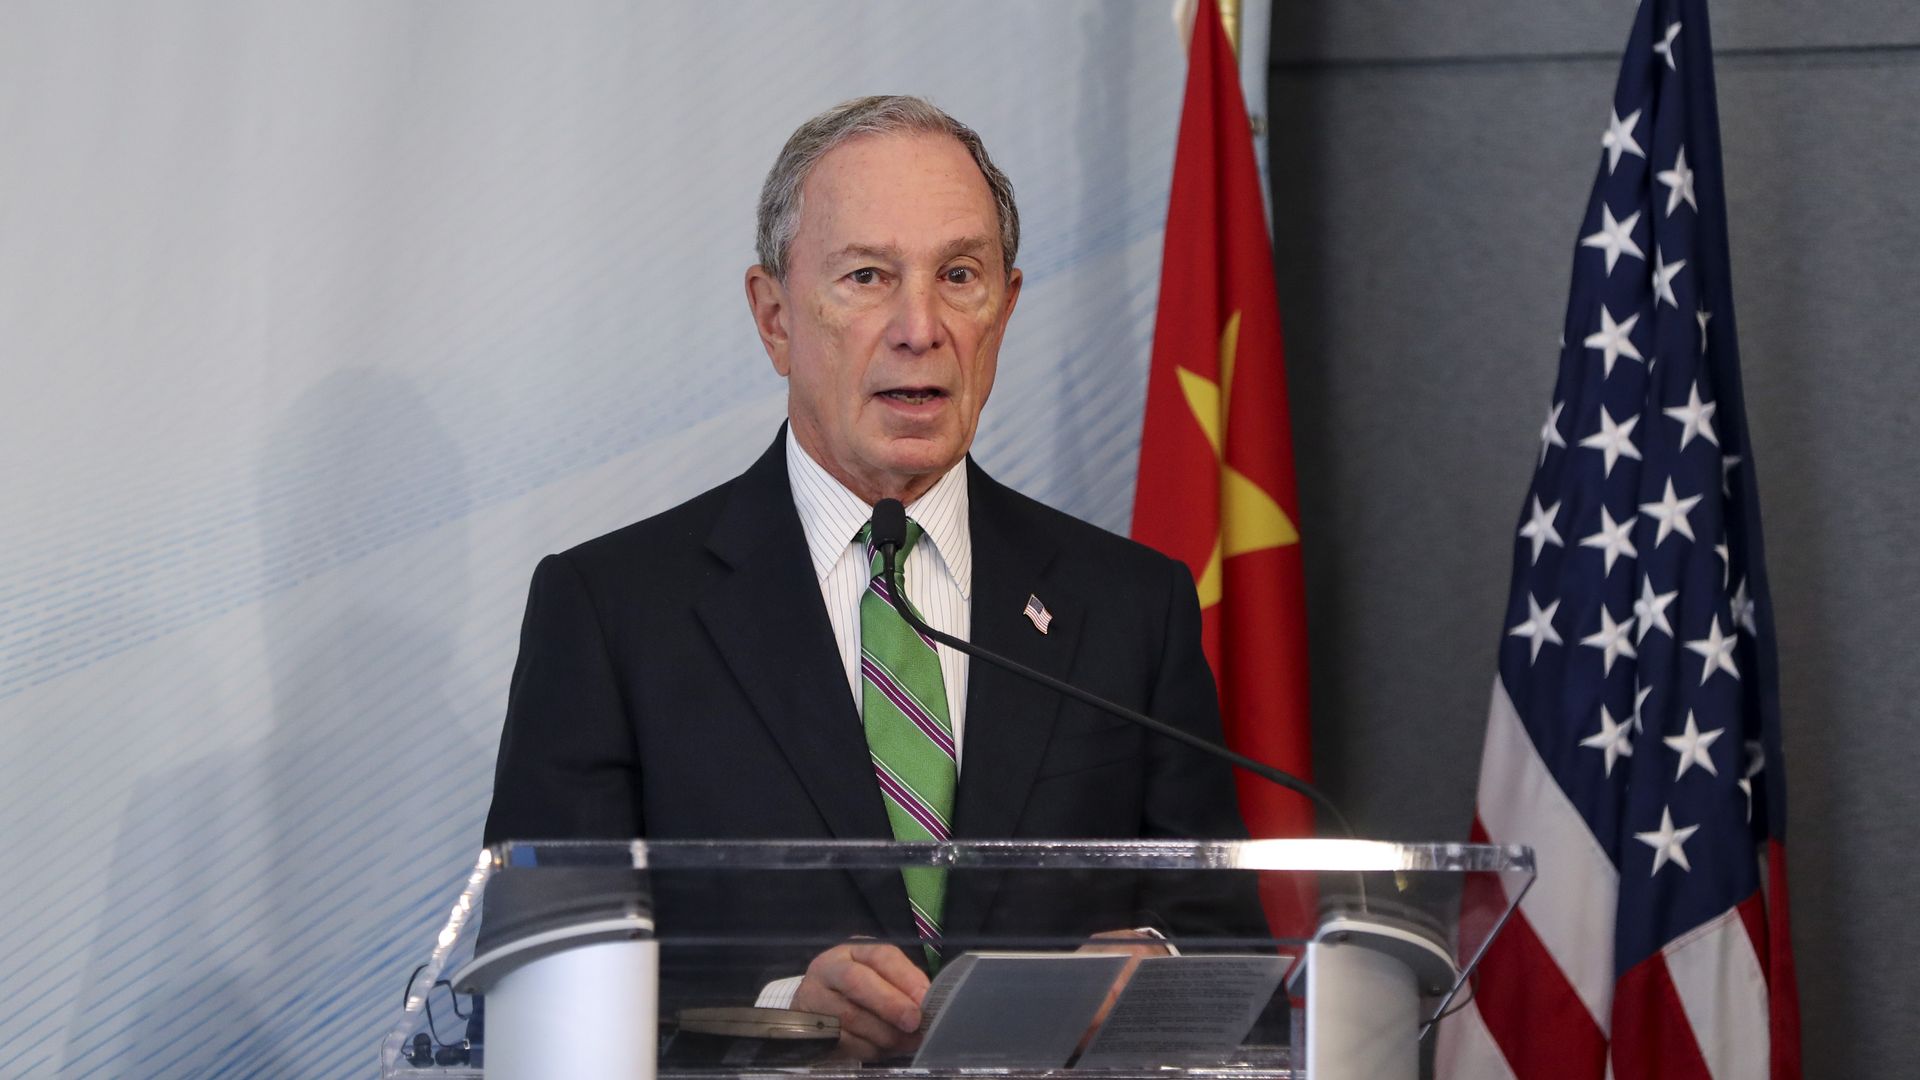 New York City mayor Michael Bloomberg delivers a speech at the High-level Dialogue on U.S.-China Economic Relations in New York, the United States, on June 14